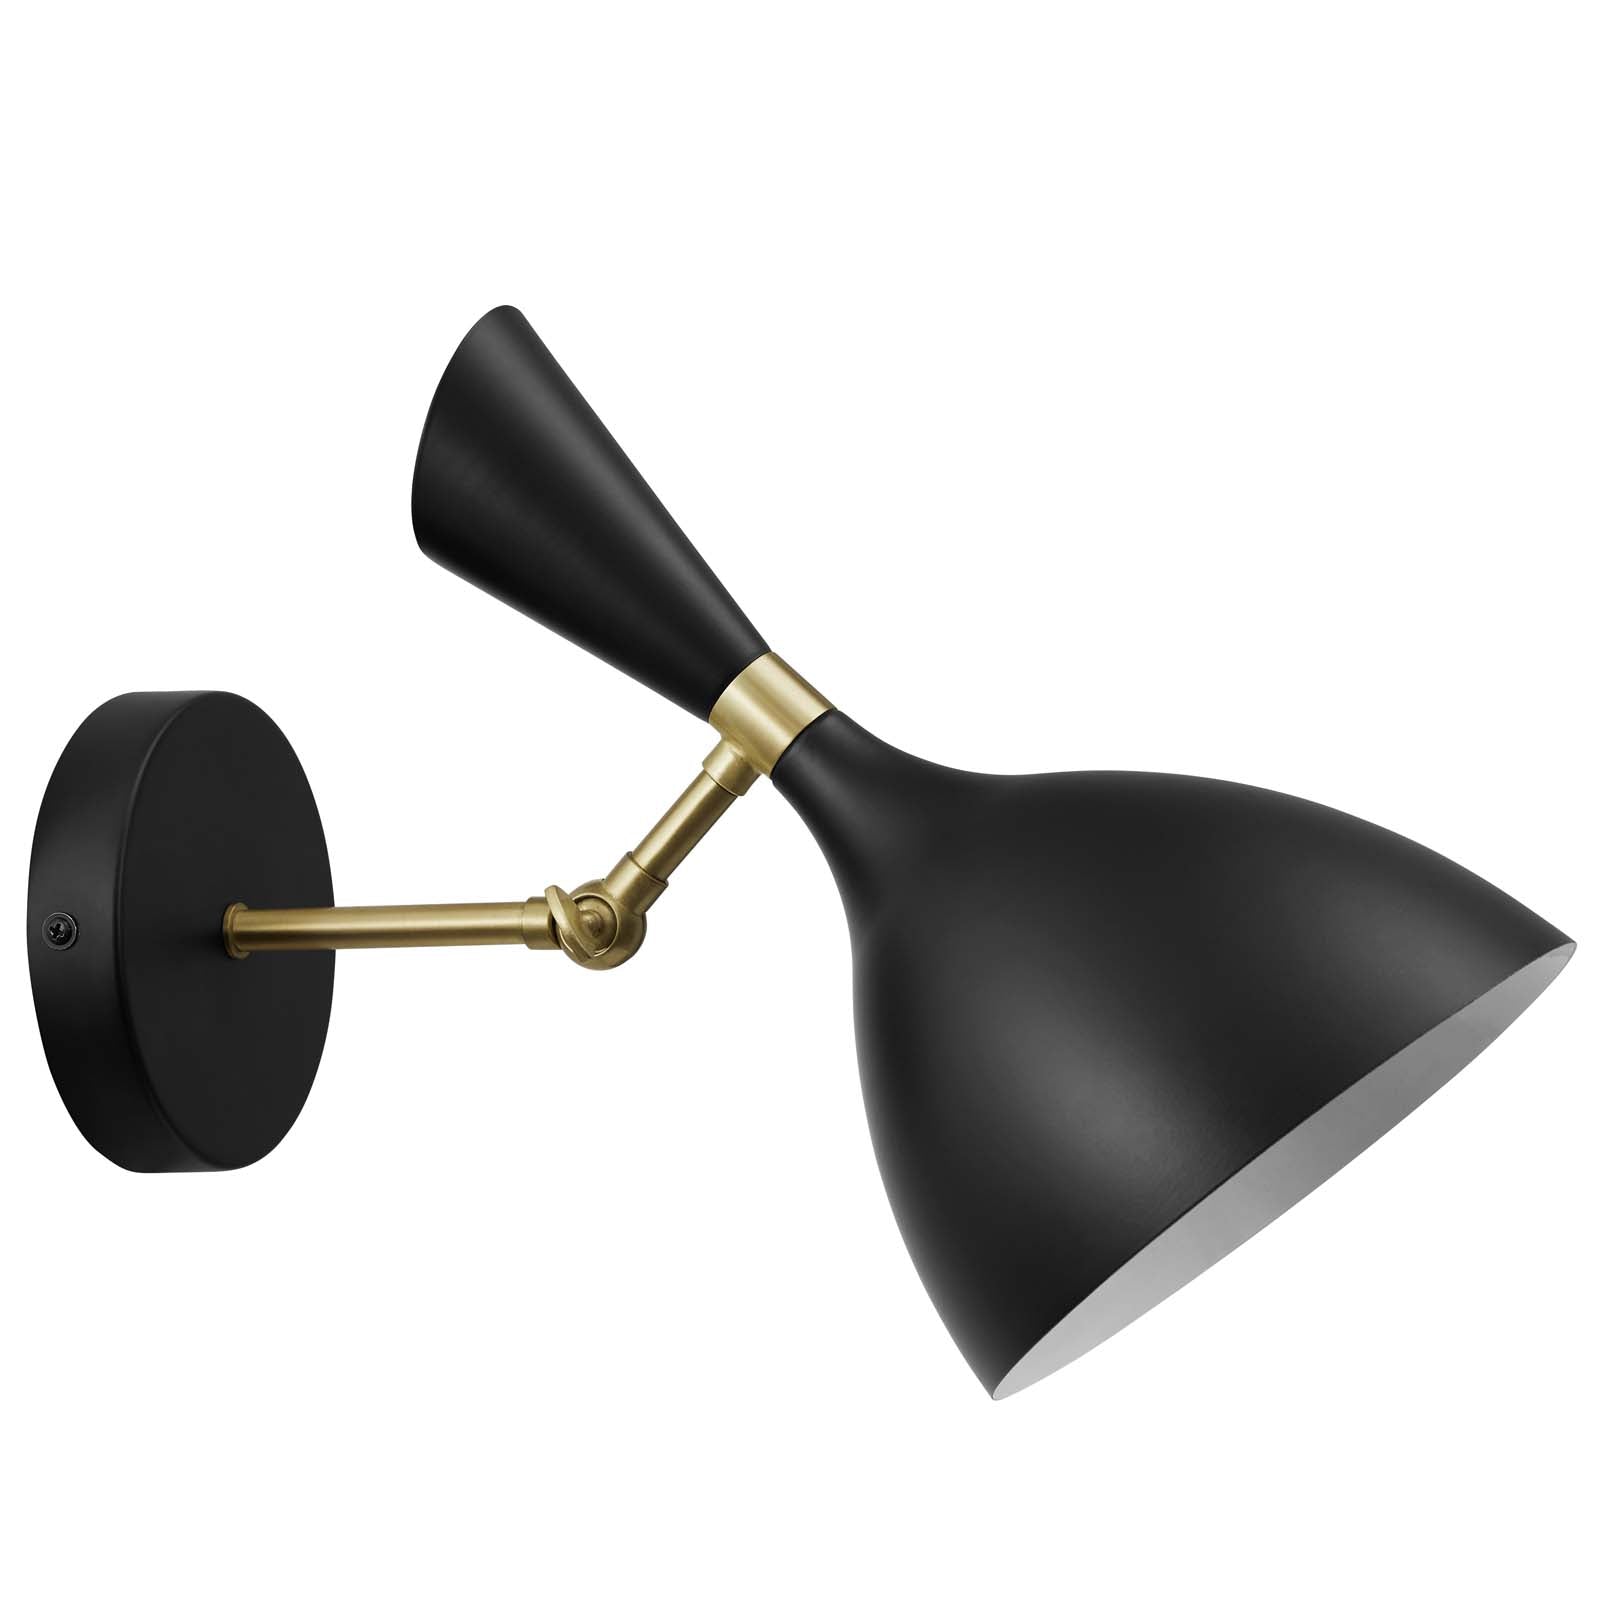 Modway Wall Sconces - Declare Adjustable Wall Sconce Black